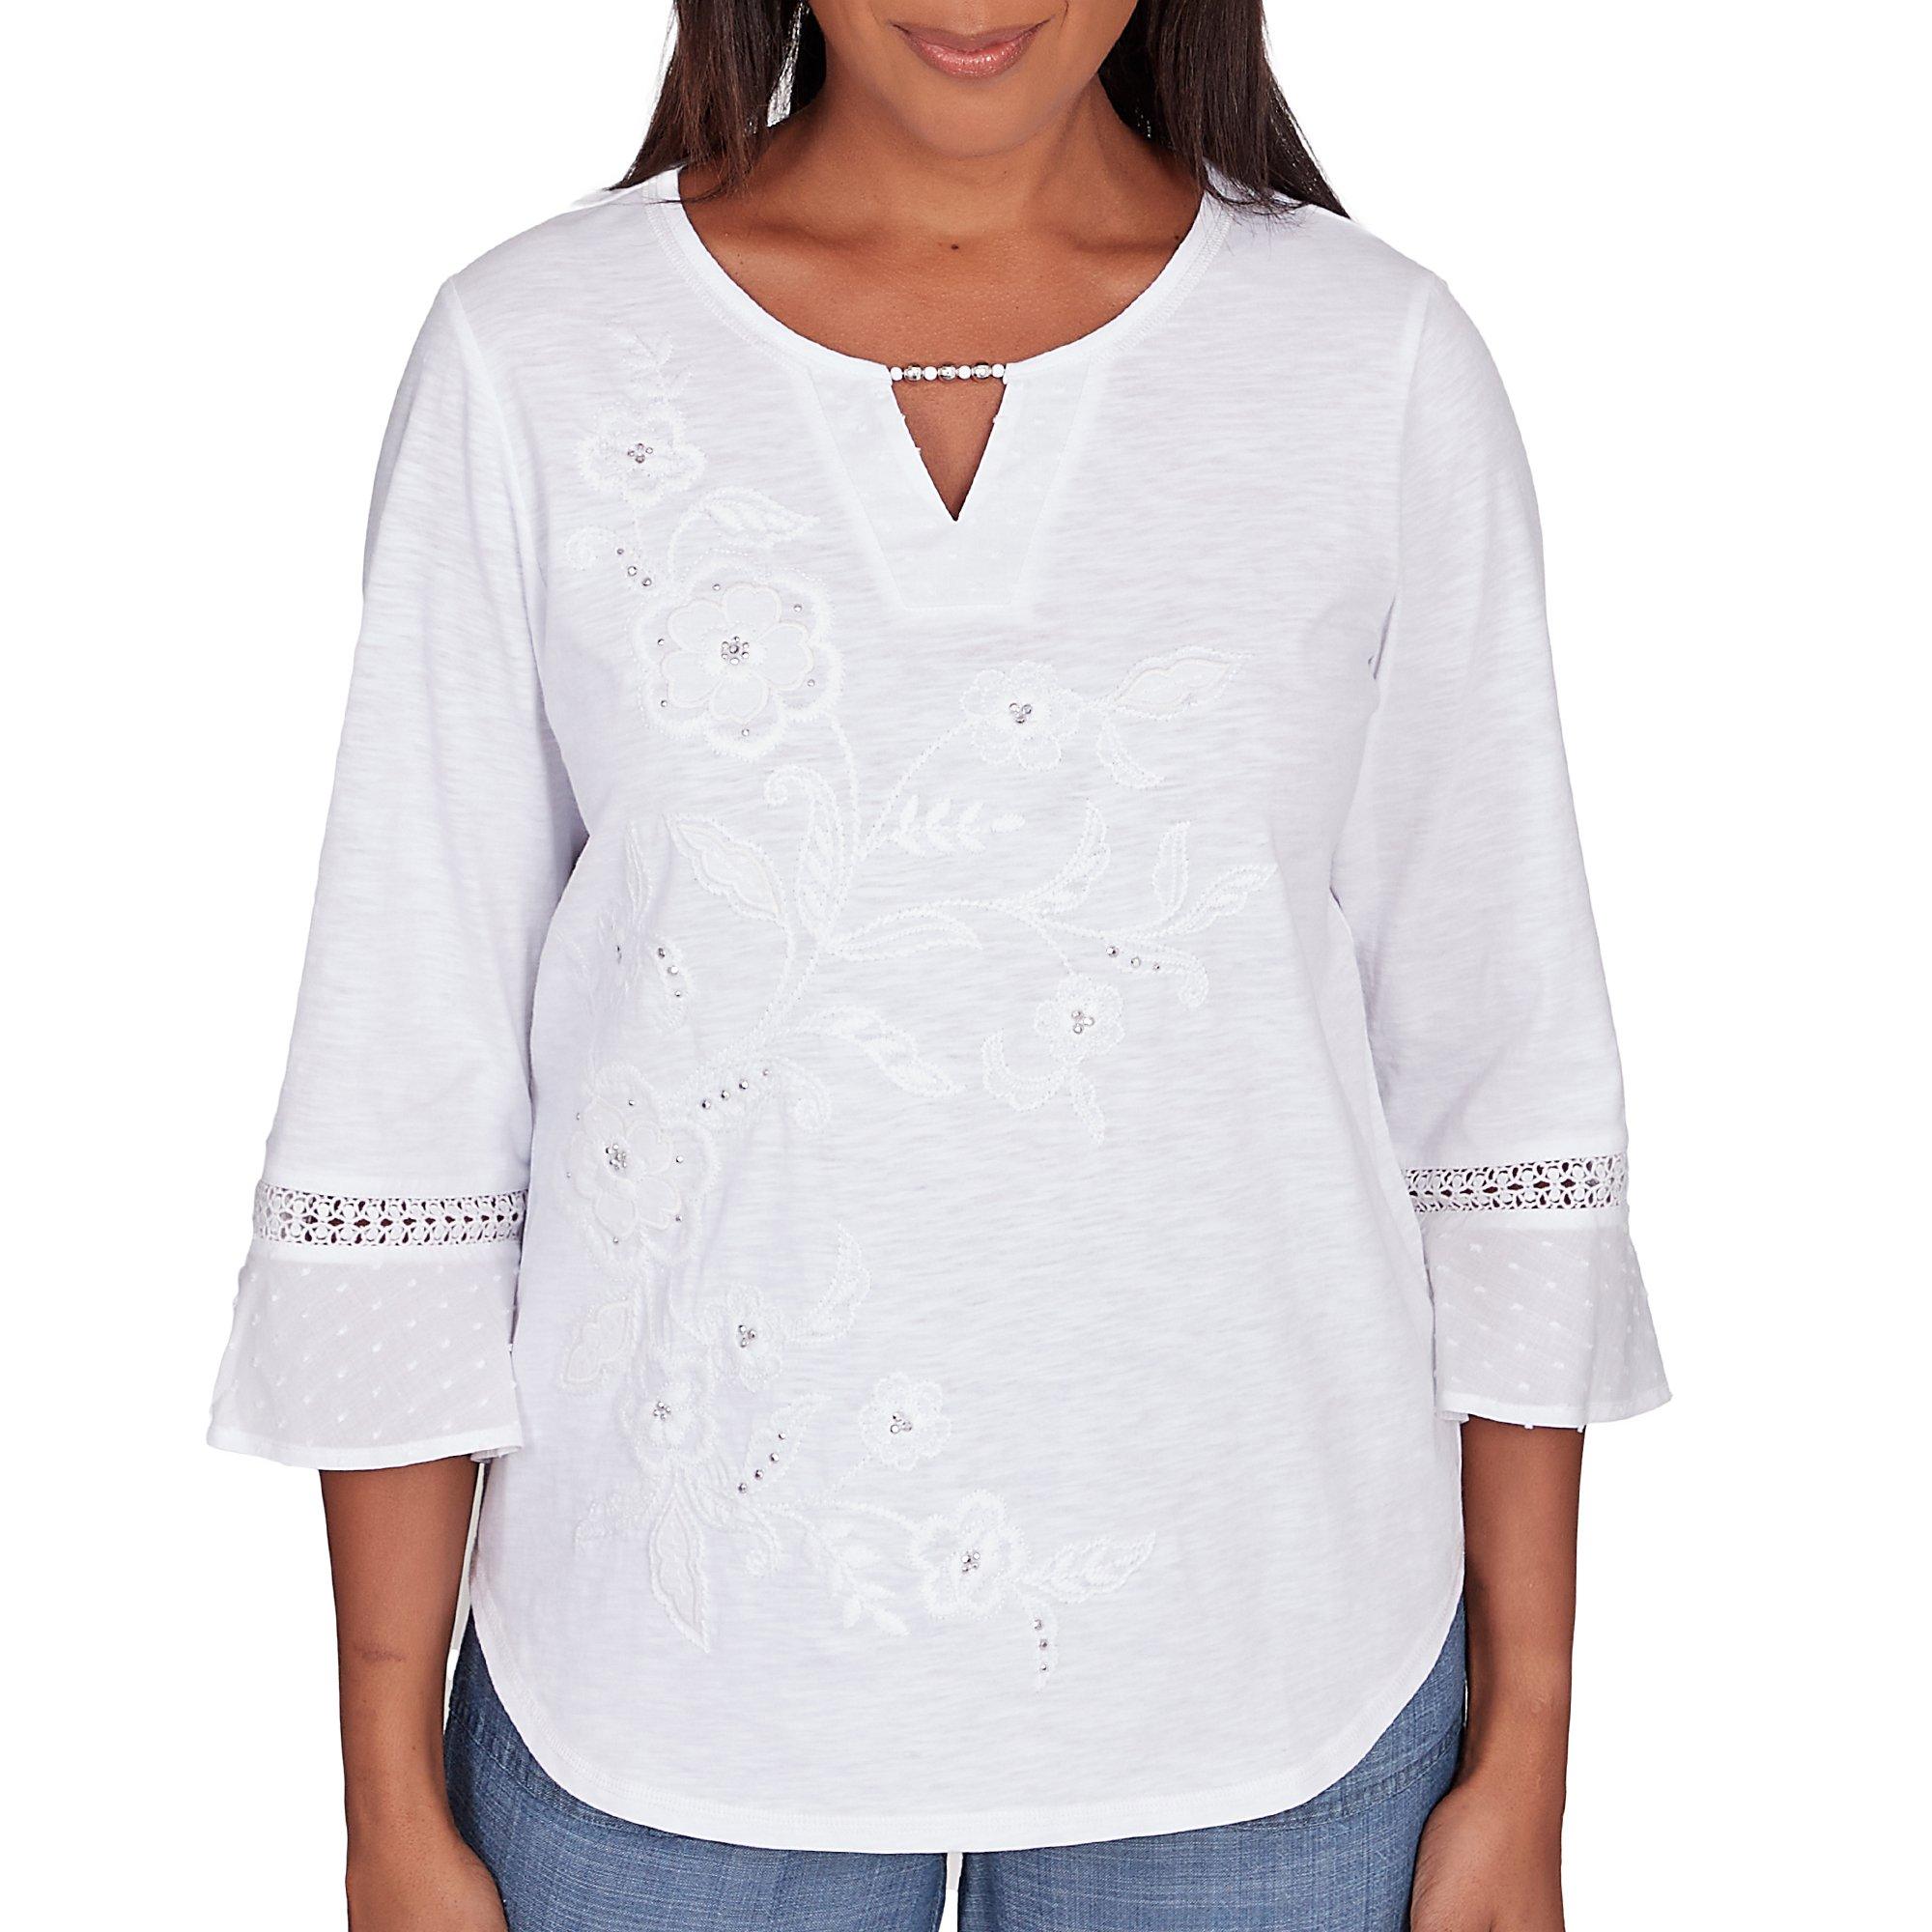 Womens 3/4 Sleeve Embroidered Floral Top